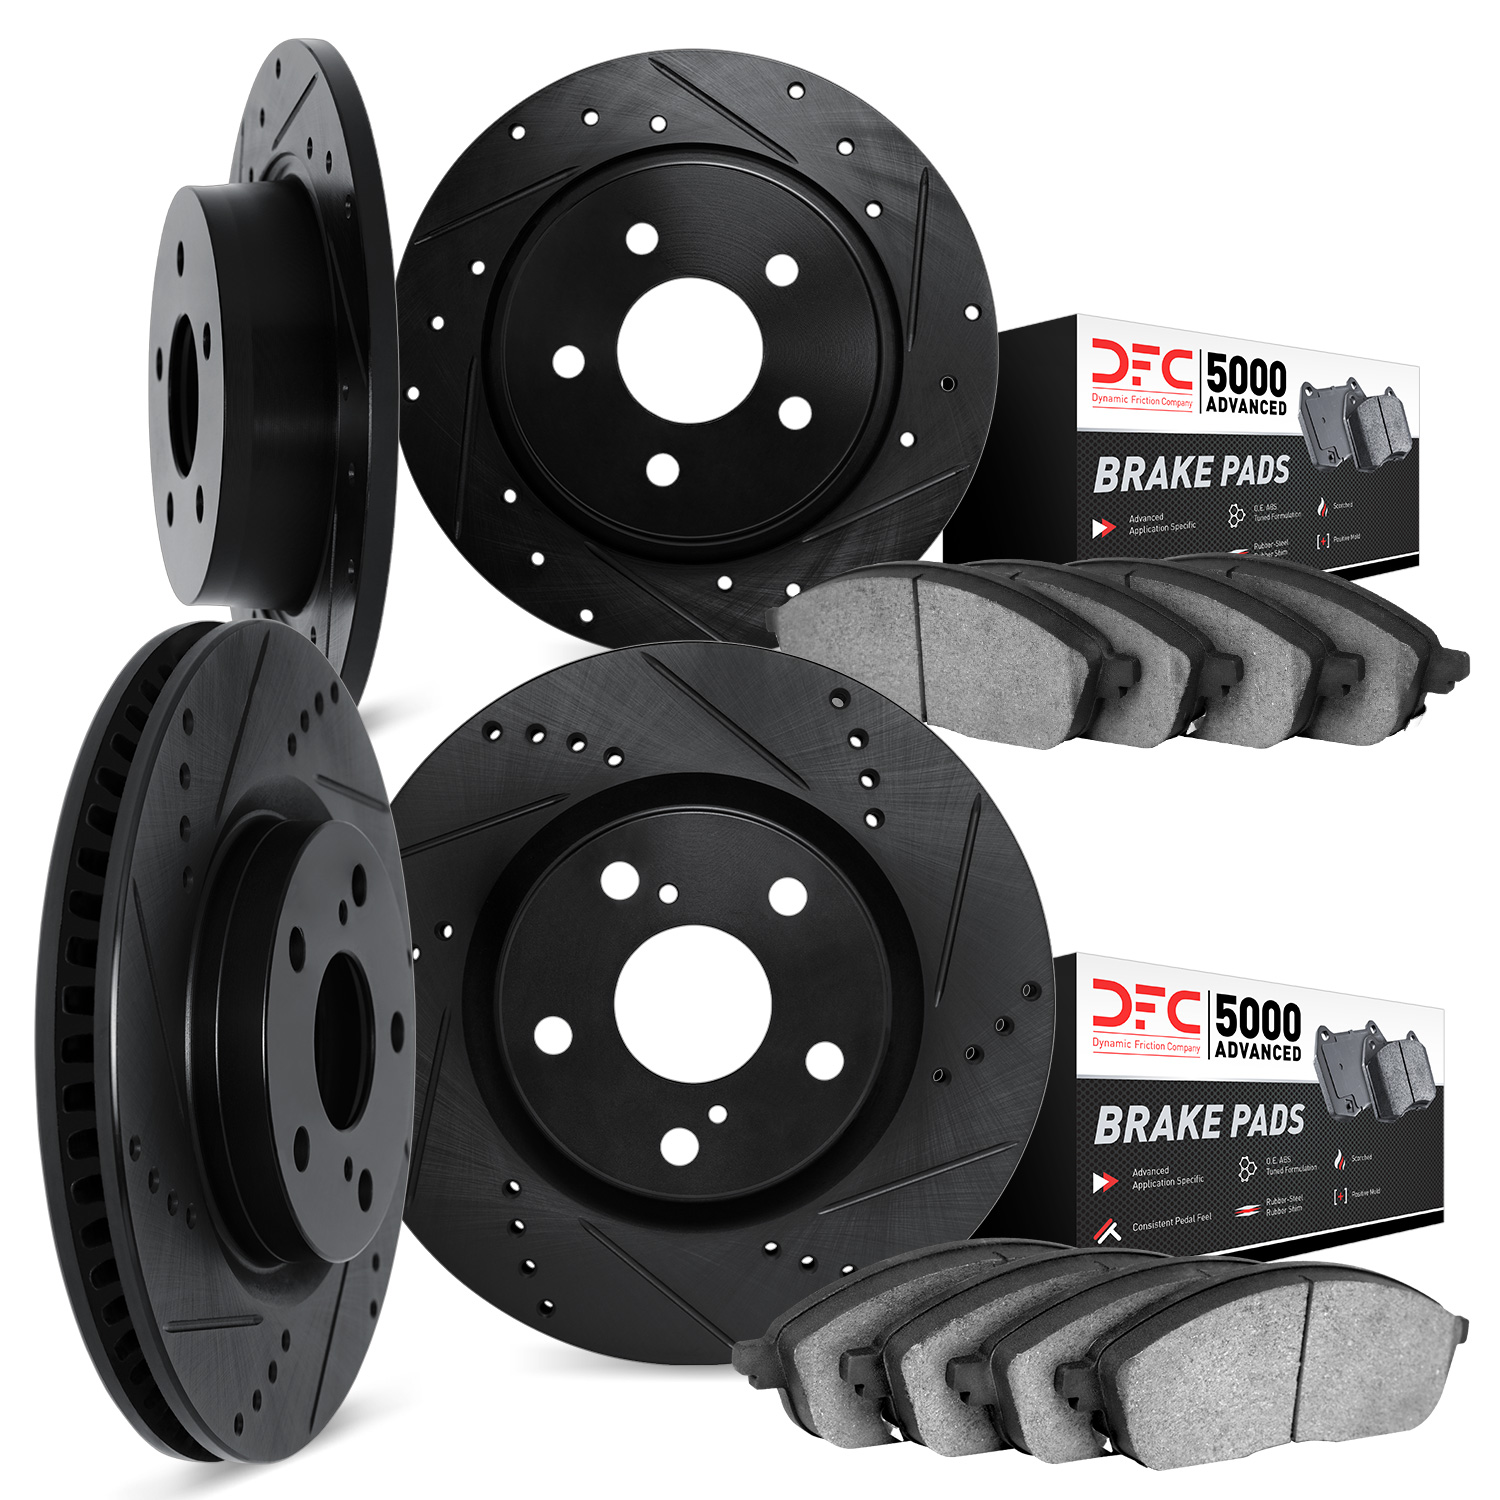 8504-45027 Drilled/Slotted Brake Rotors w/5000 Advanced Brake Pads Kit [Black], 2006-2011 GM, Position: Front and Rear